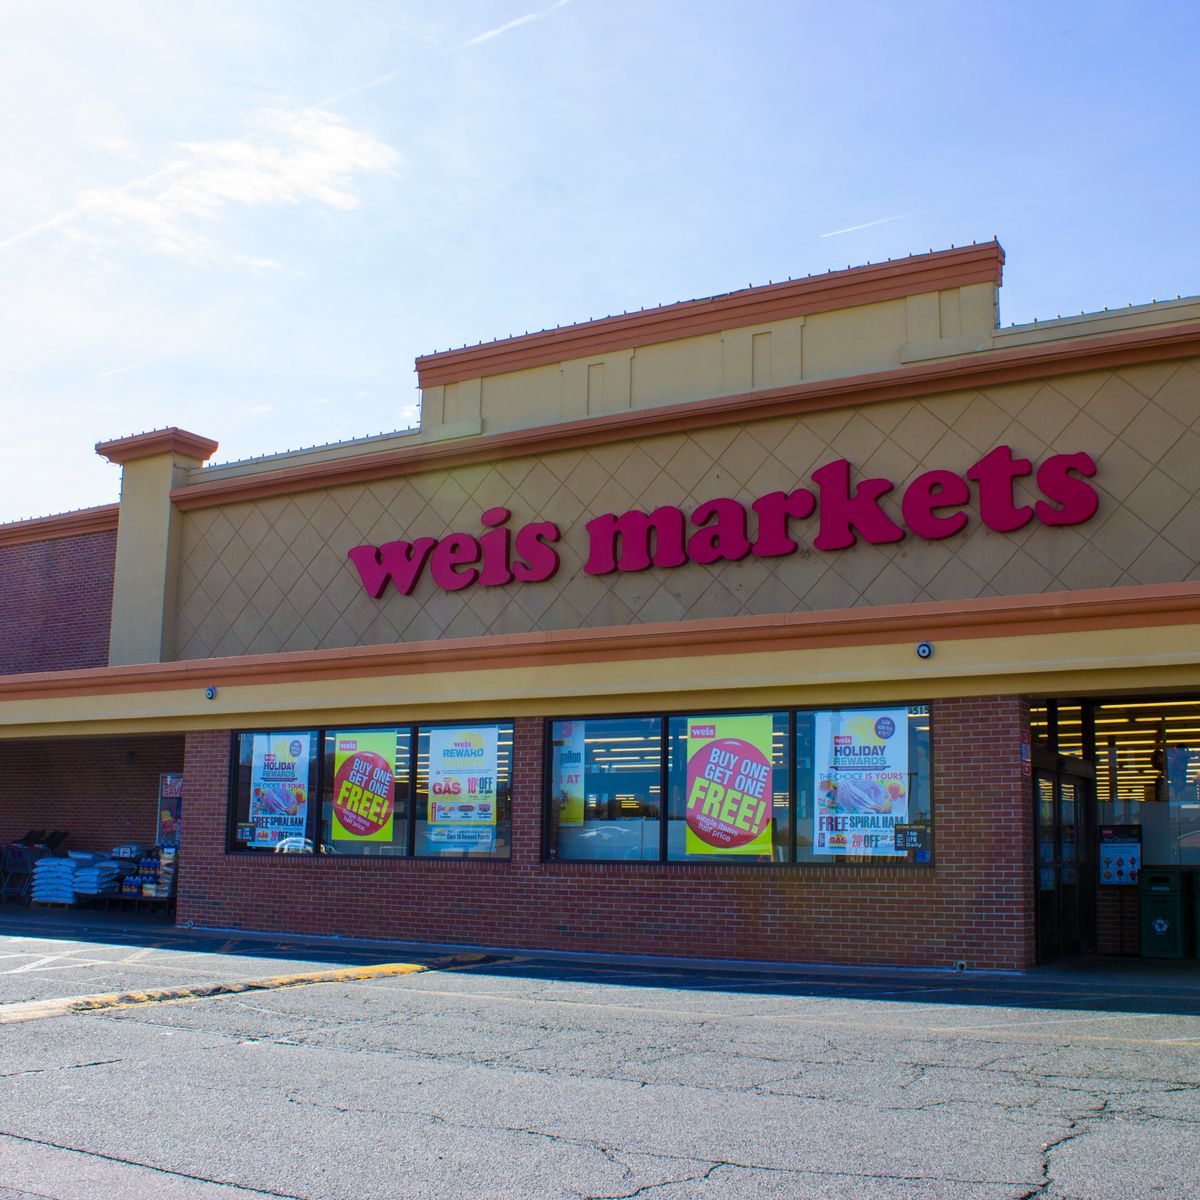 Were Weis Markets Employees Banned From Displaying the American Flag?